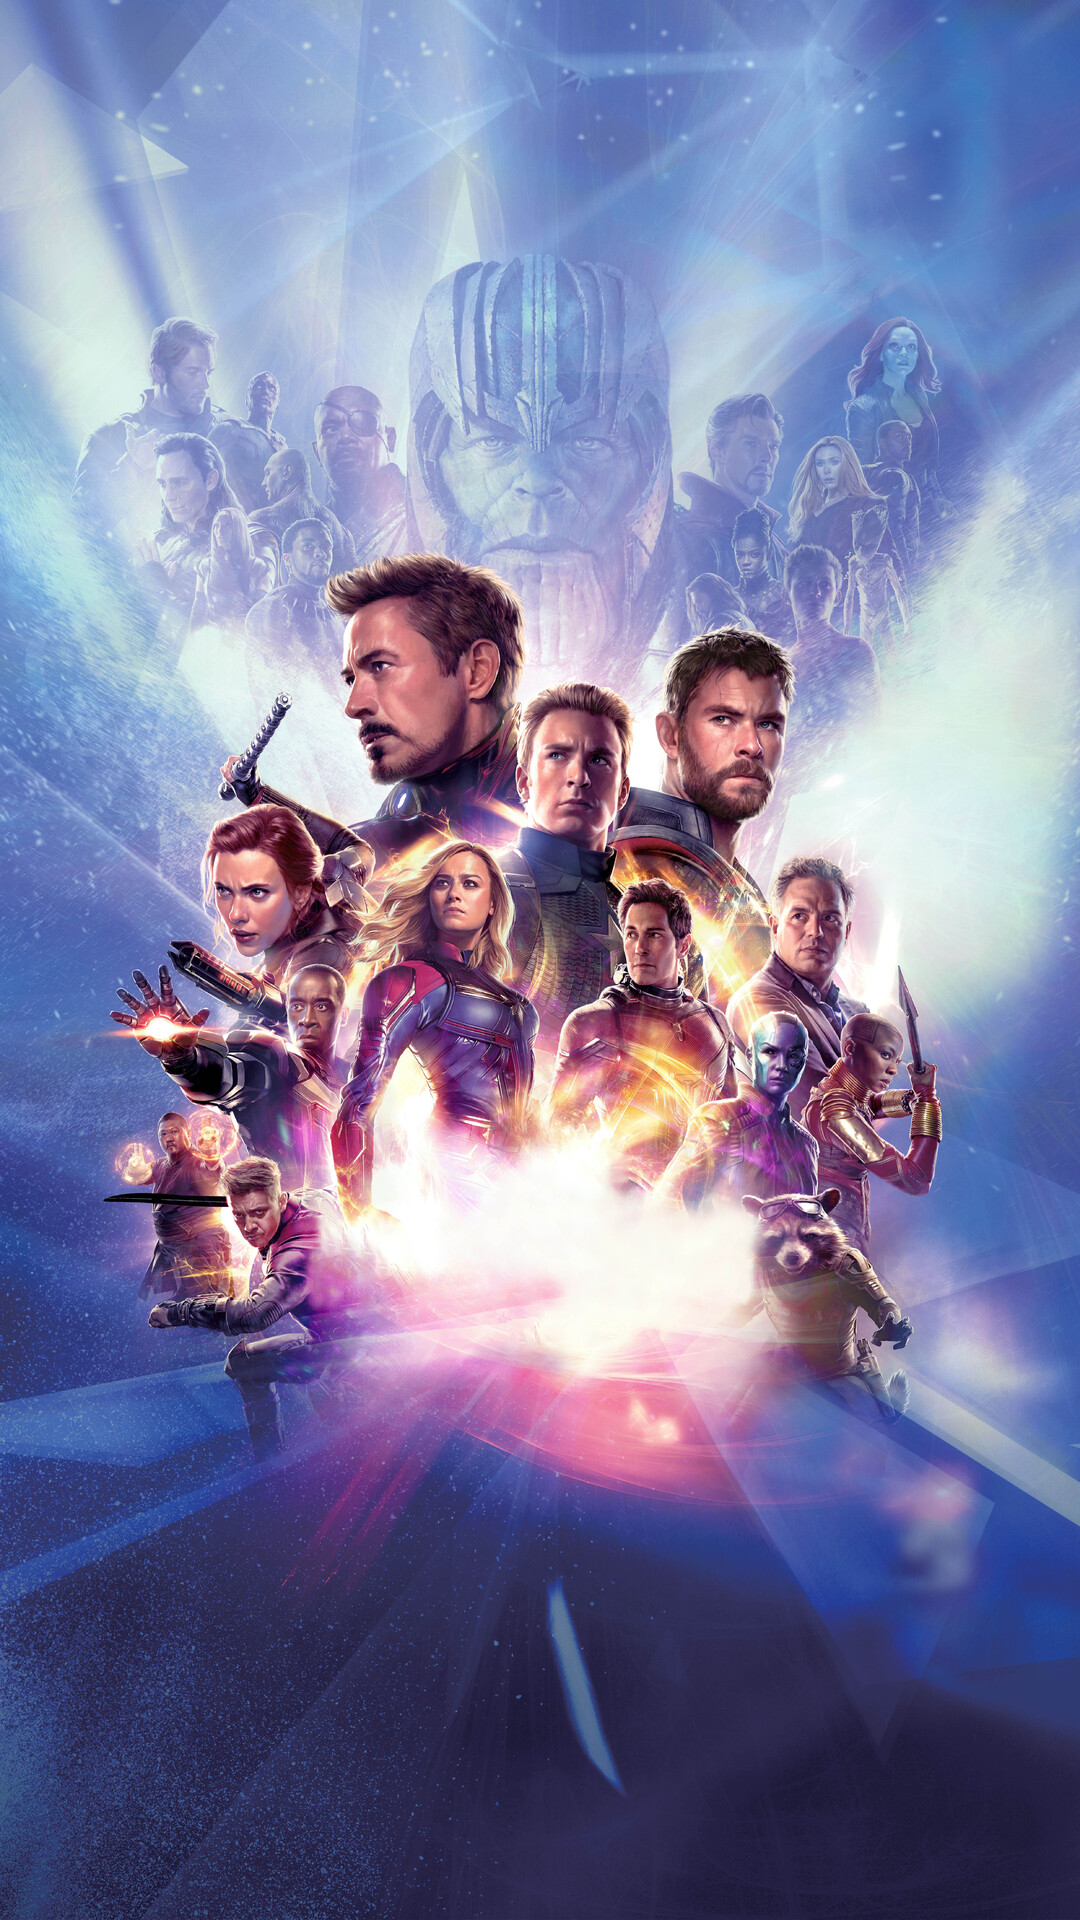 1080x1920 Avengers Endgame 2019 8k Iphone 7,6s,6 Plus, Pixel xl ,One Plus  3,3t,5 HD 4k Wallpapers, Images, Backgrounds, Photos and Pictures